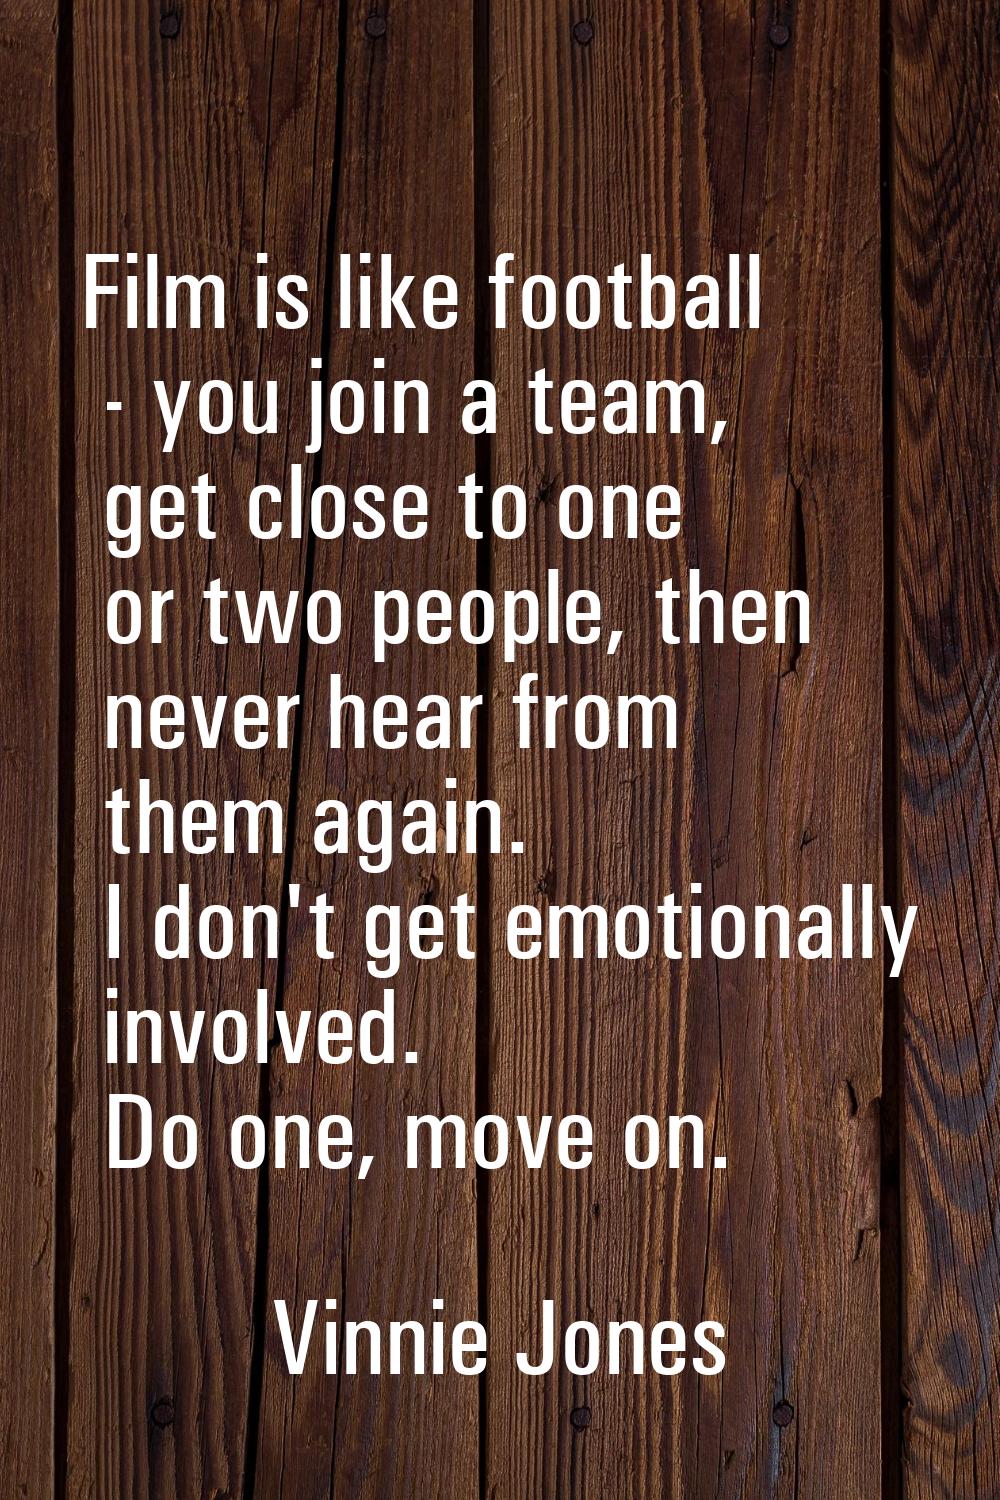 Film is like football - you join a team, get close to one or two people, then never hear from them 